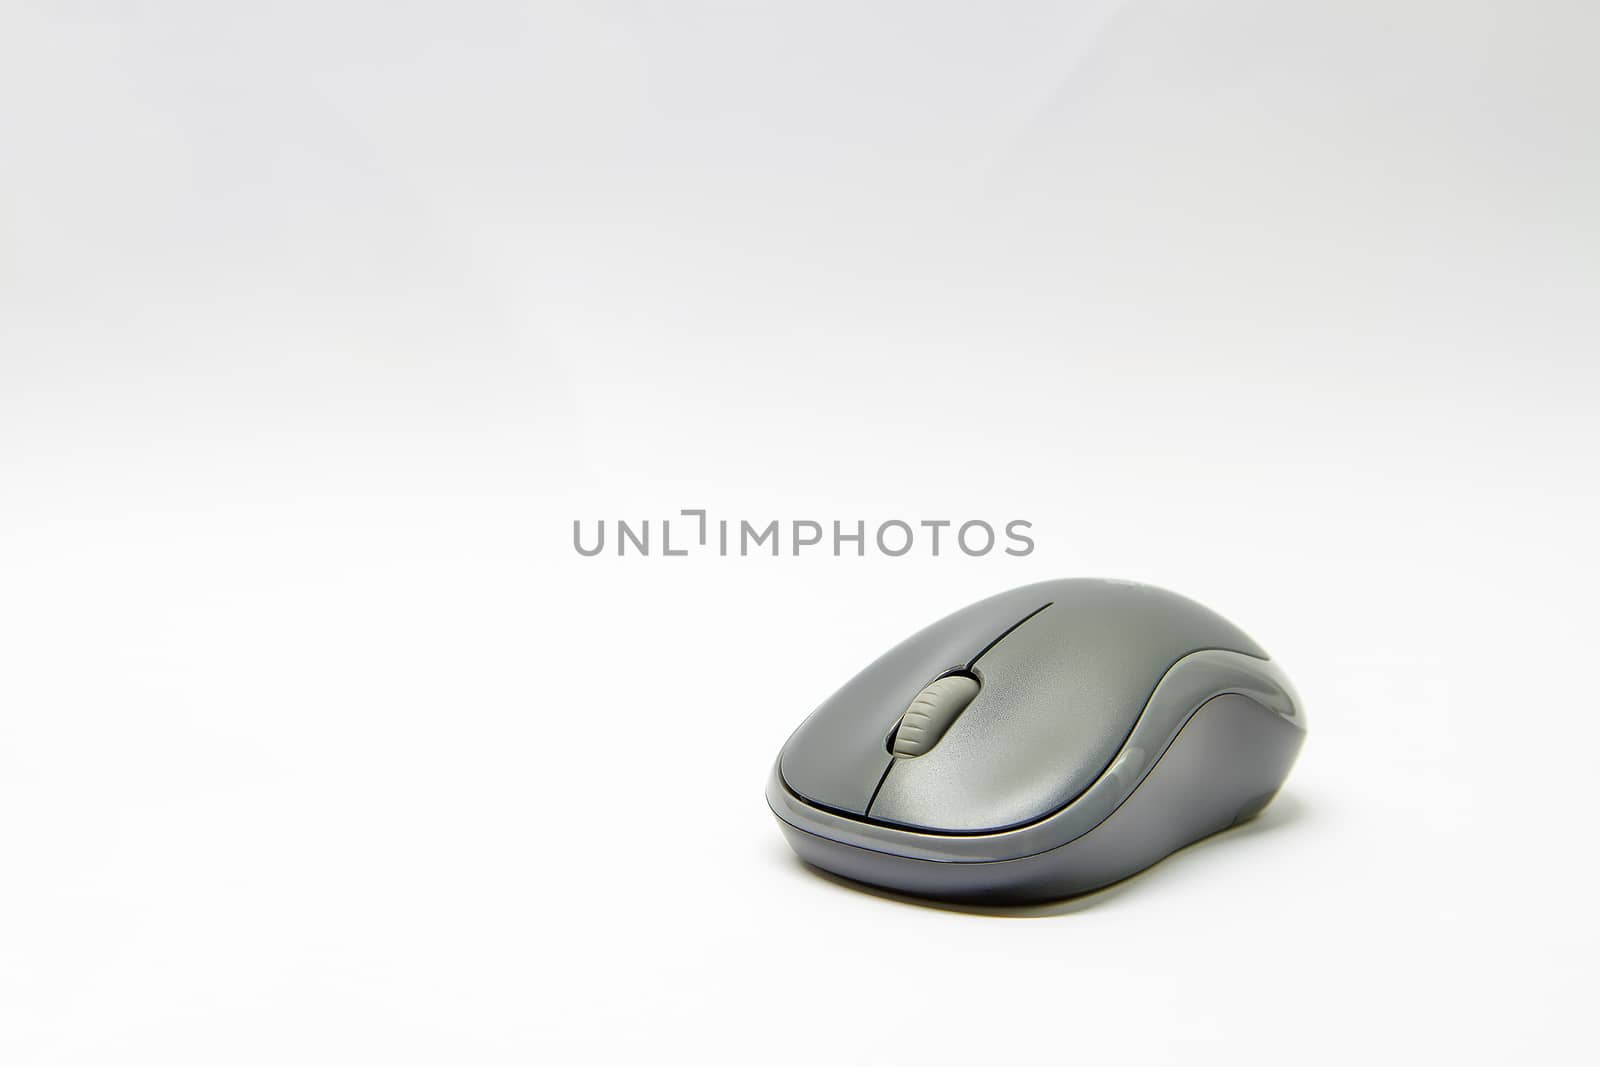 Computer mouse wireless on white background by TakerWalker